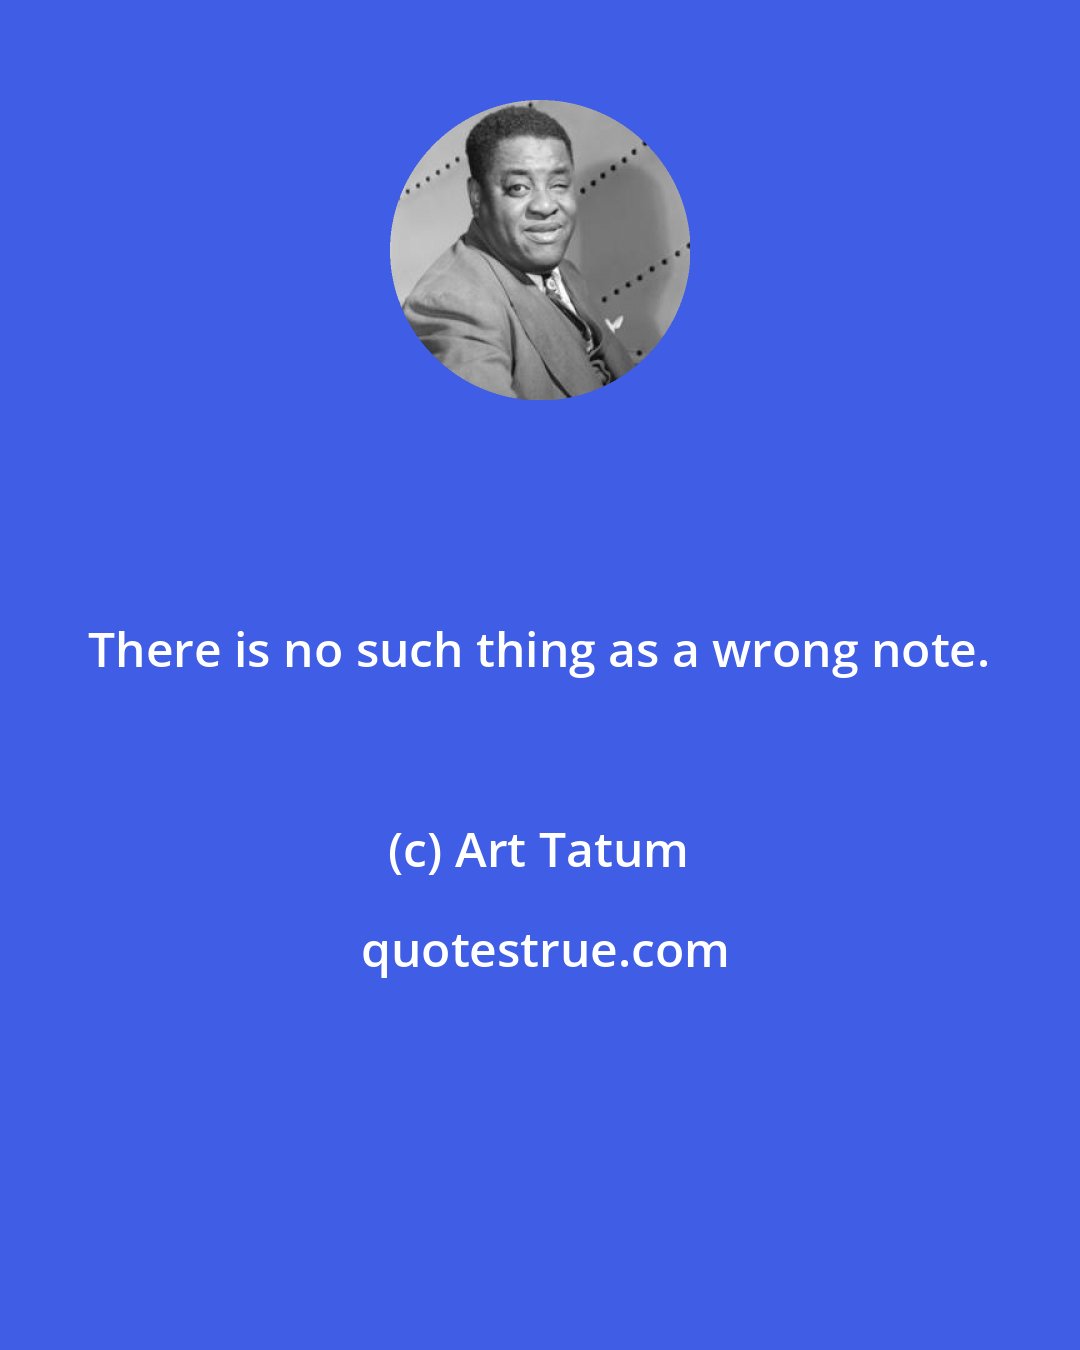 Art Tatum: There is no such thing as a wrong note.